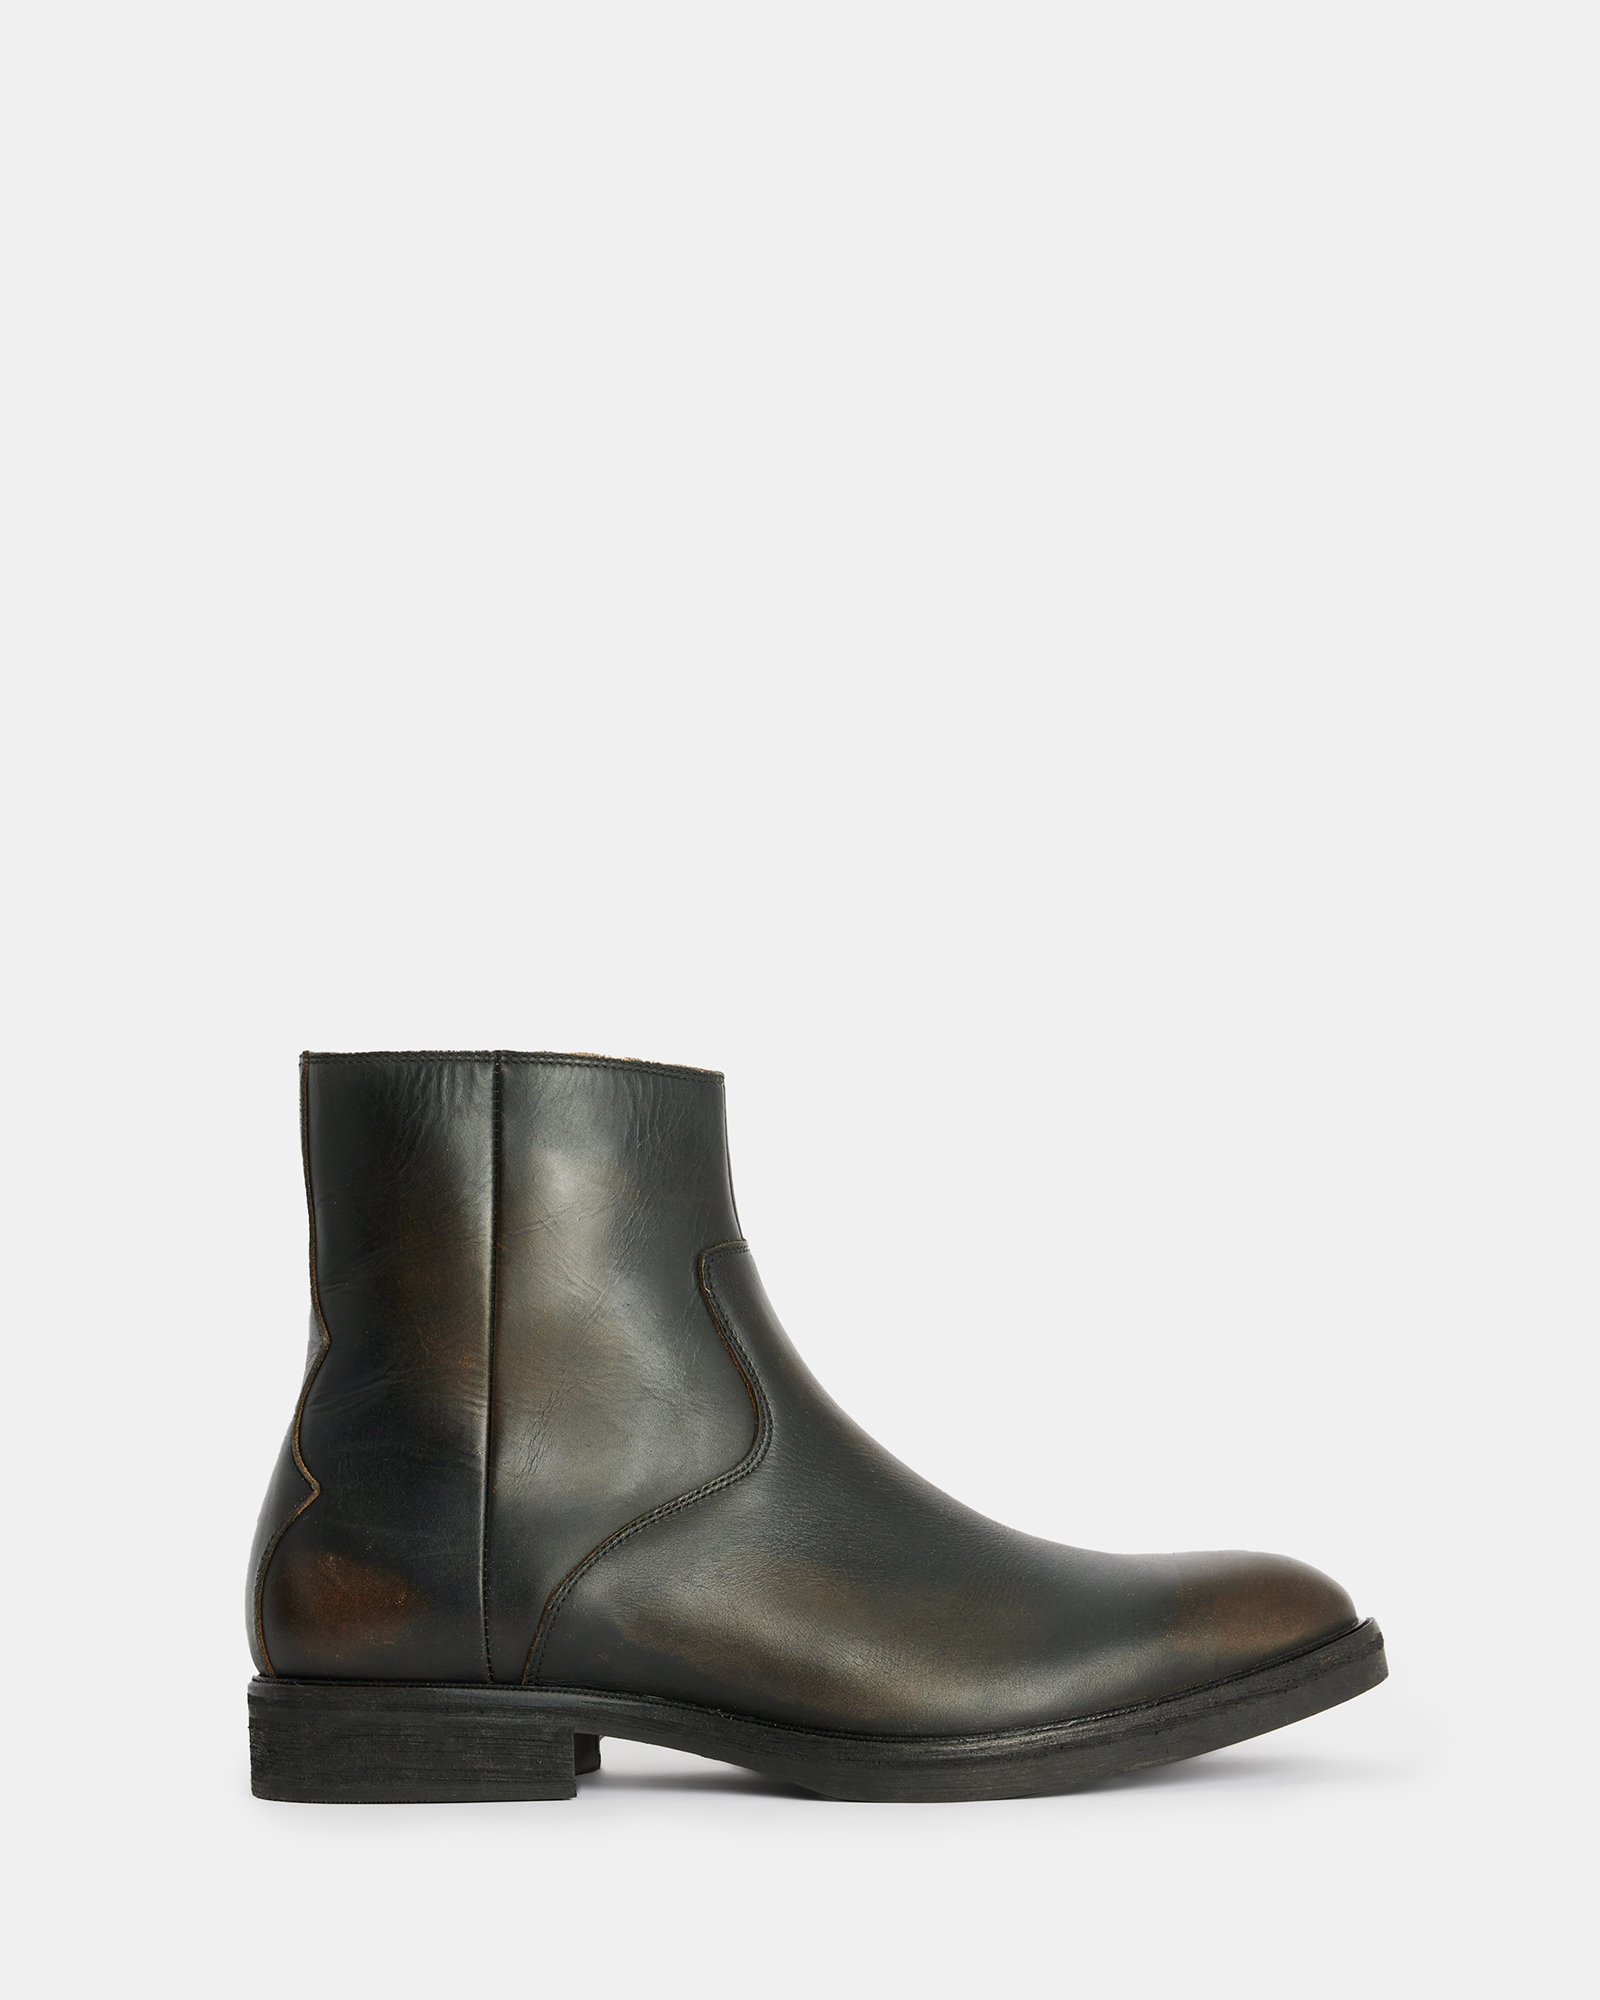 AllSaints Lang Leather Zip Up Boots,, Dark Brown, Size: UK